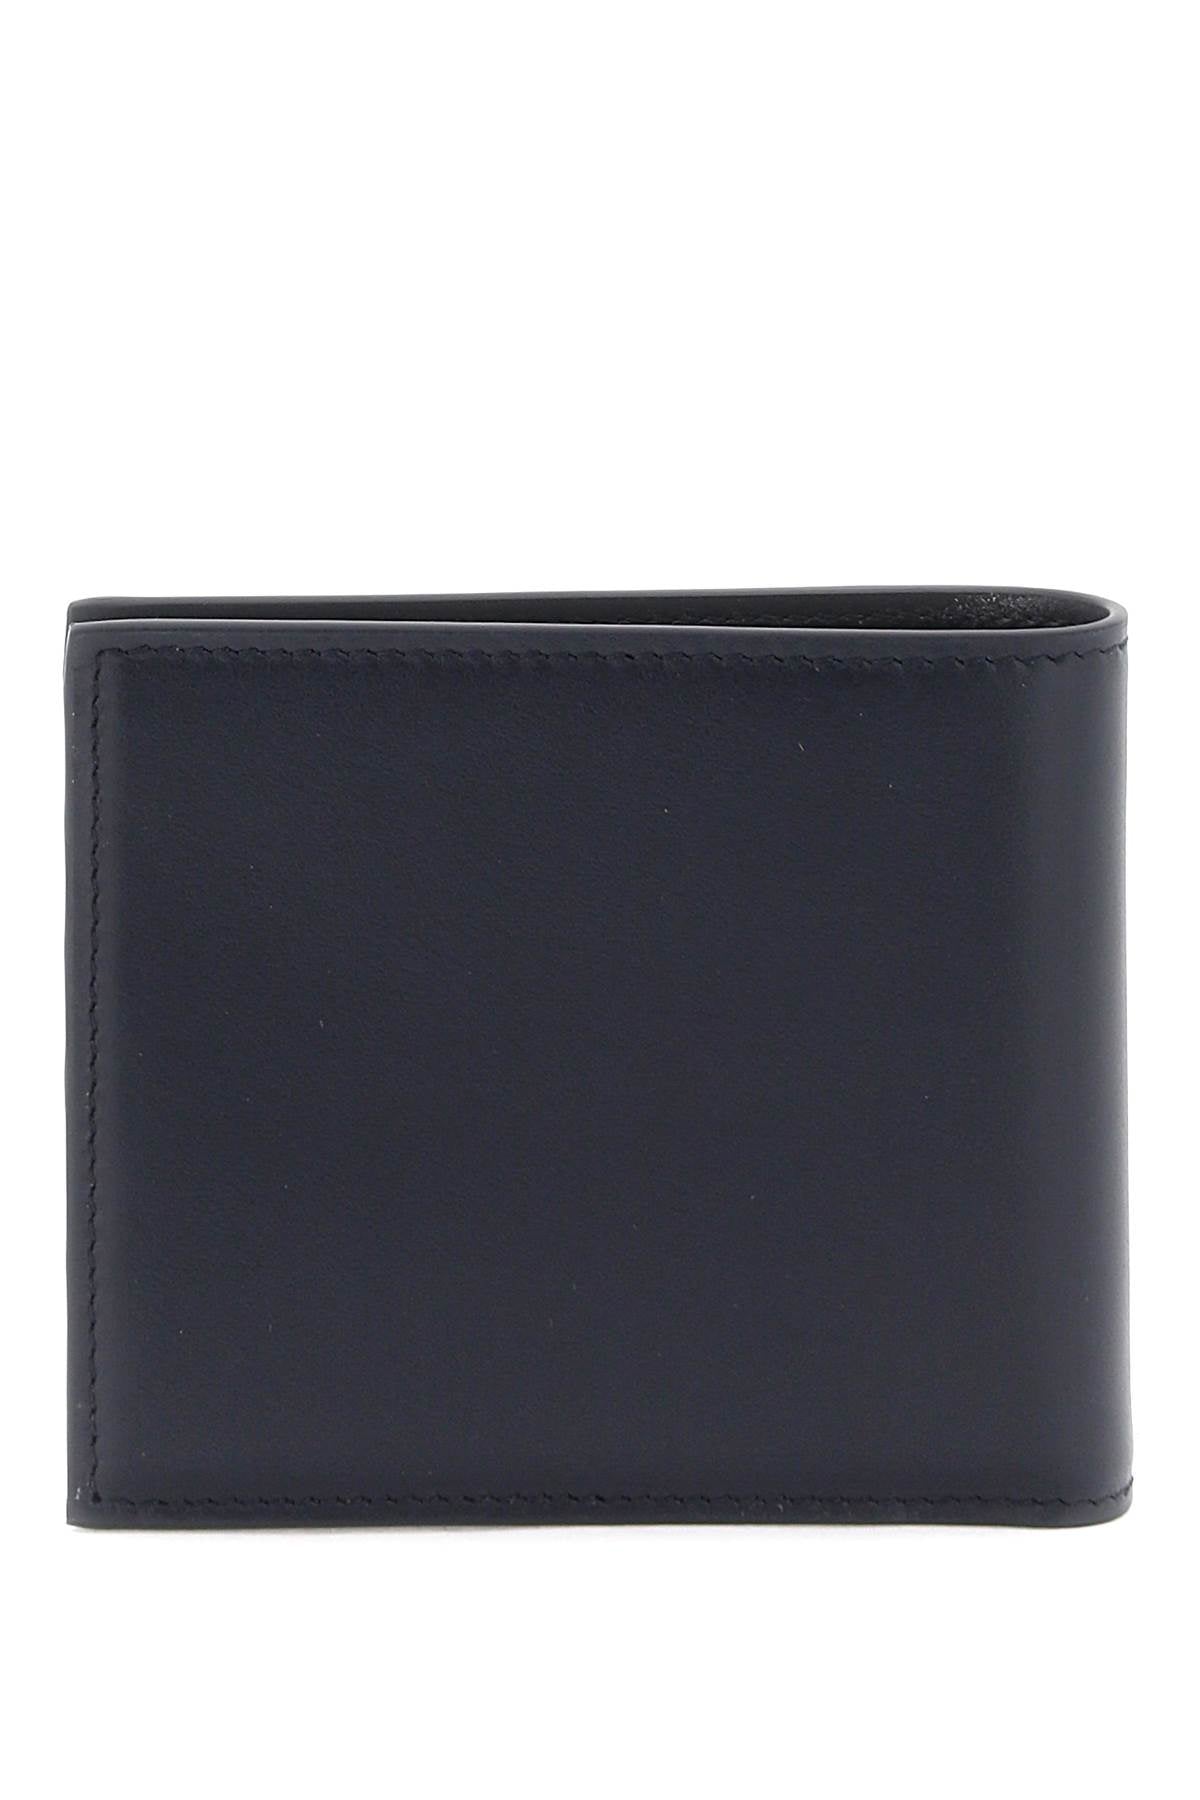 Dolce & gabbana wallet with logo-2